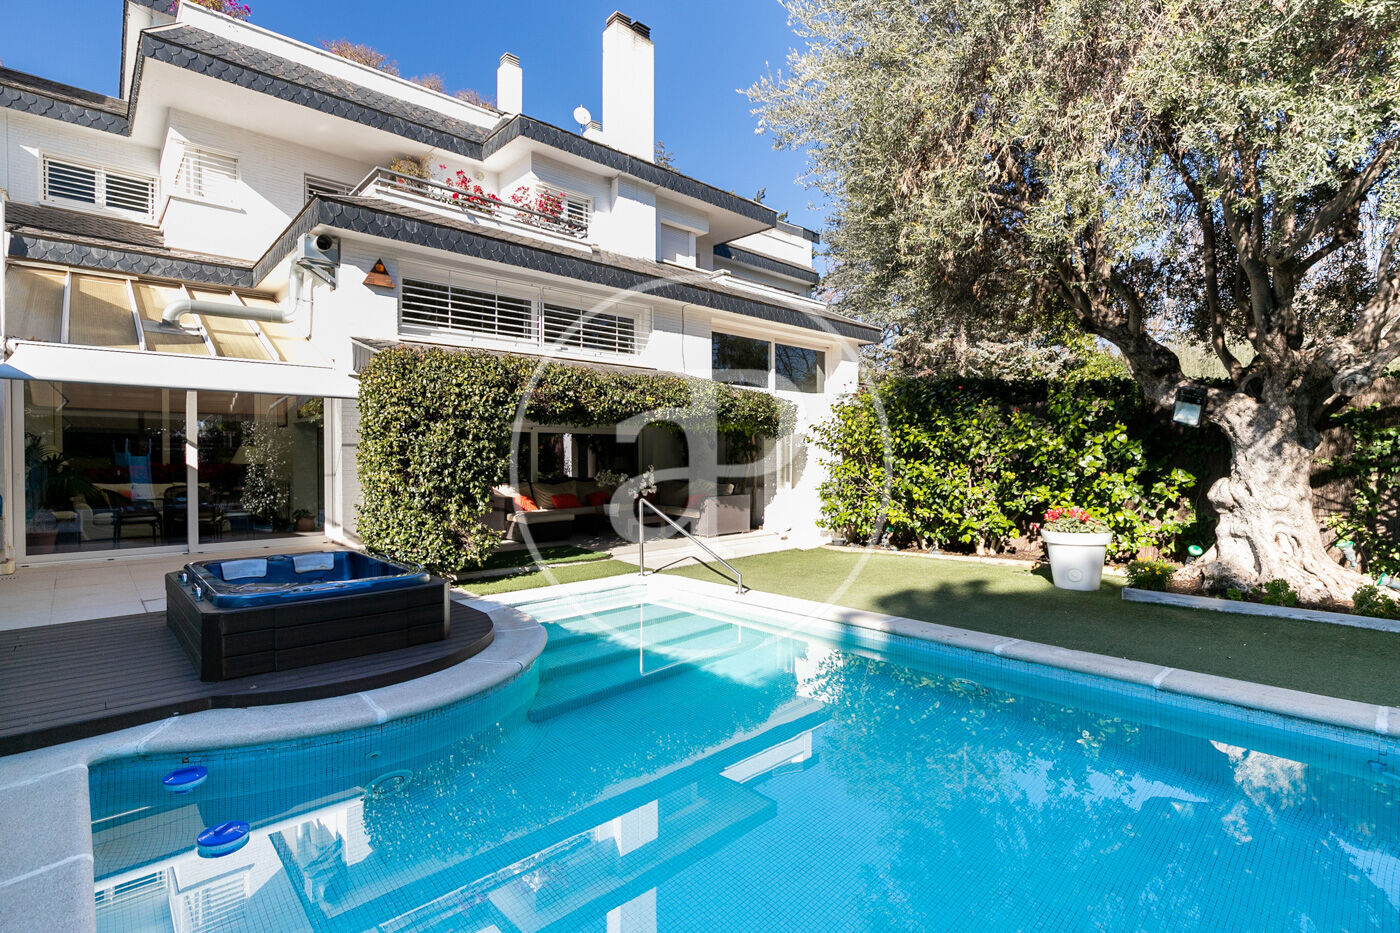 Magnificent semi-detached house for sale with private pool in Pedralbes (Barcelona)